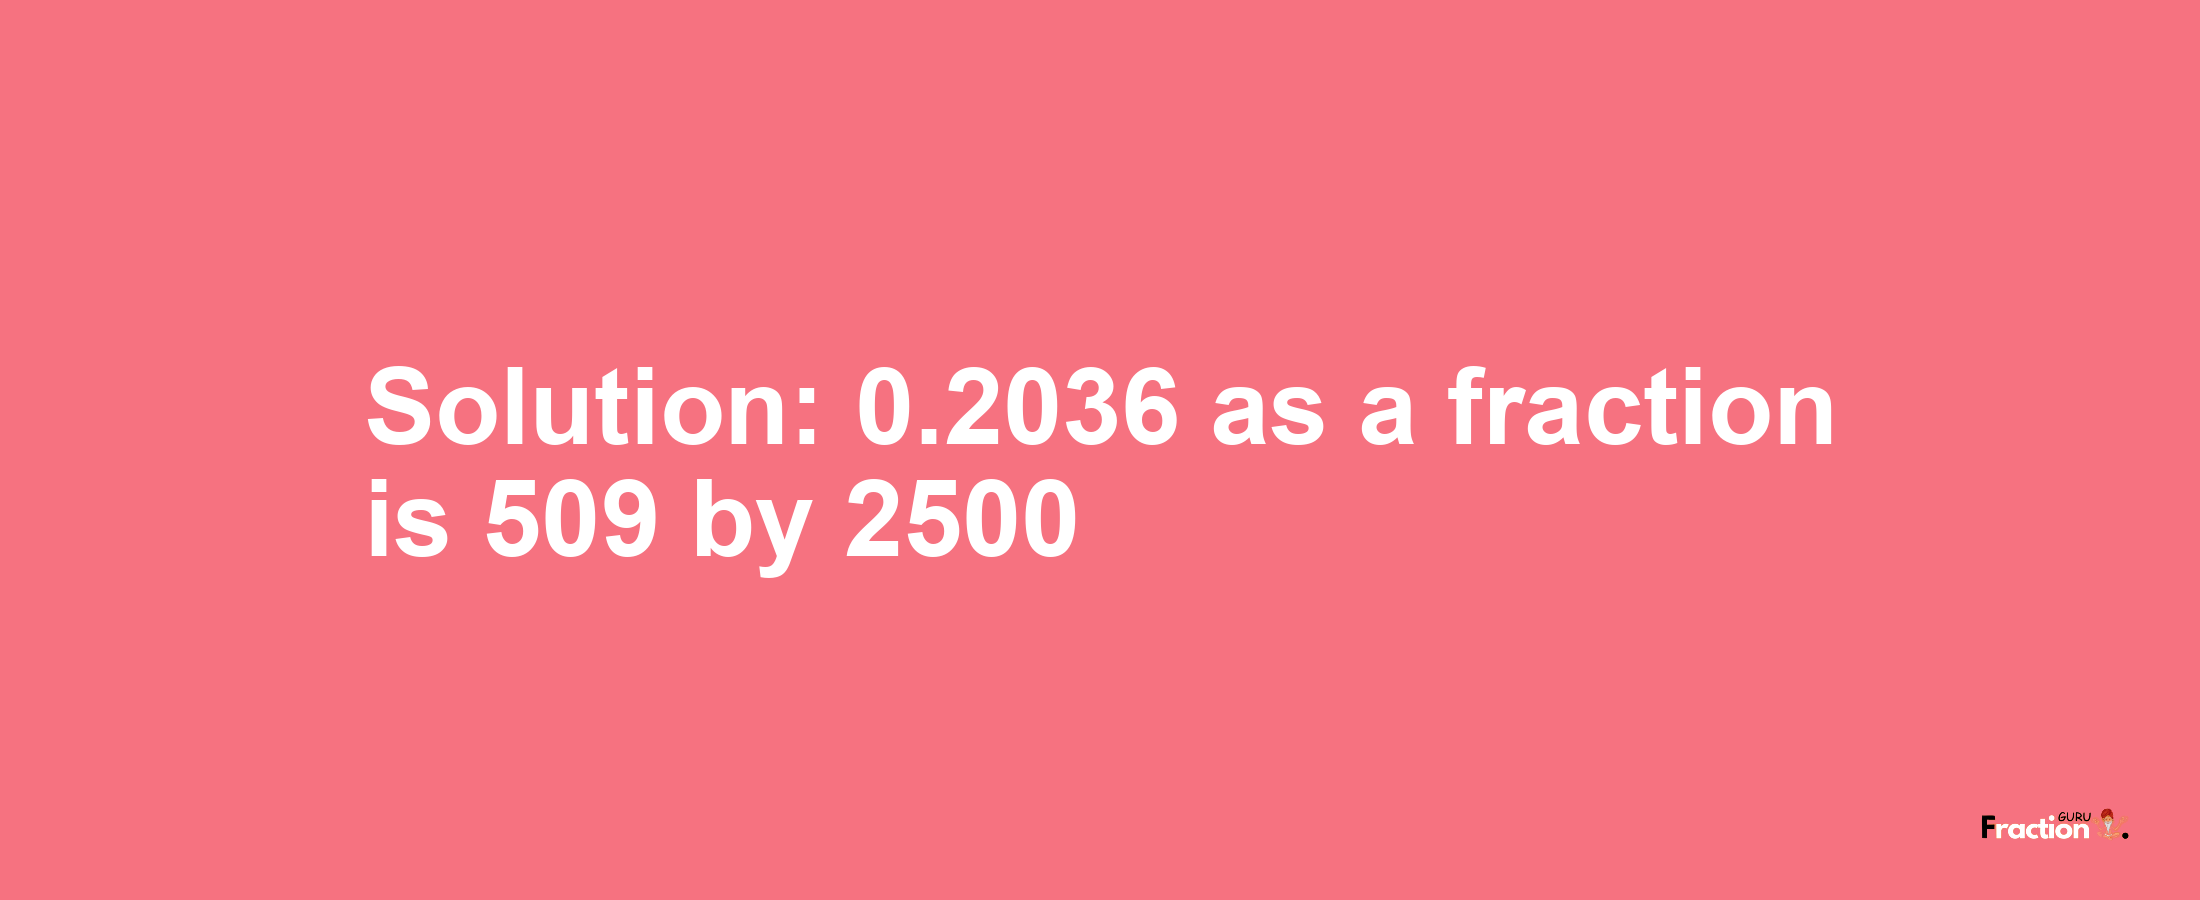 Solution:0.2036 as a fraction is 509/2500